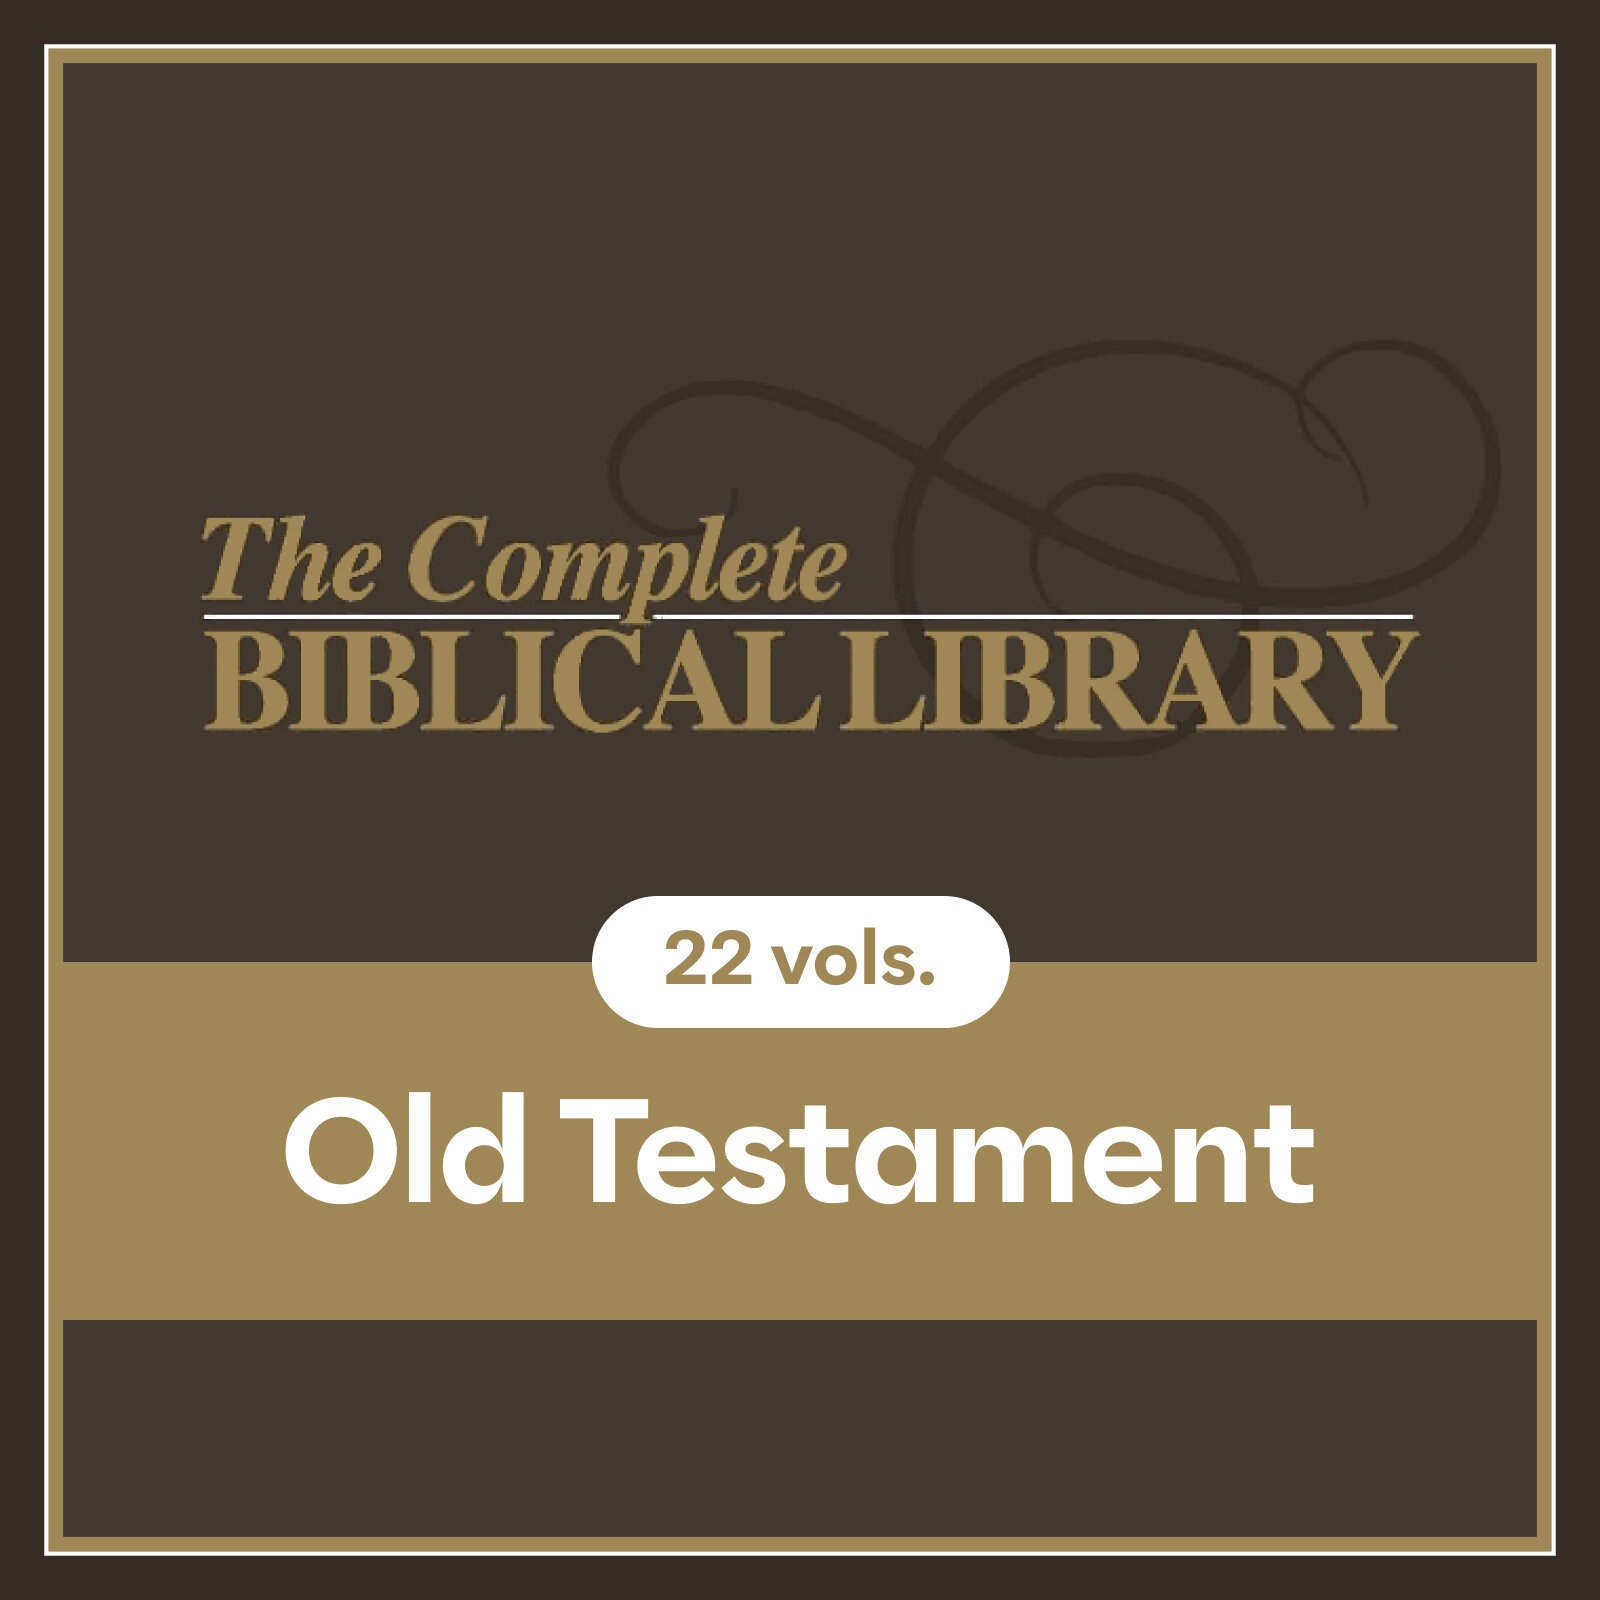 Old Testament, 22 vols. (The Complete Biblical Library | CBL)